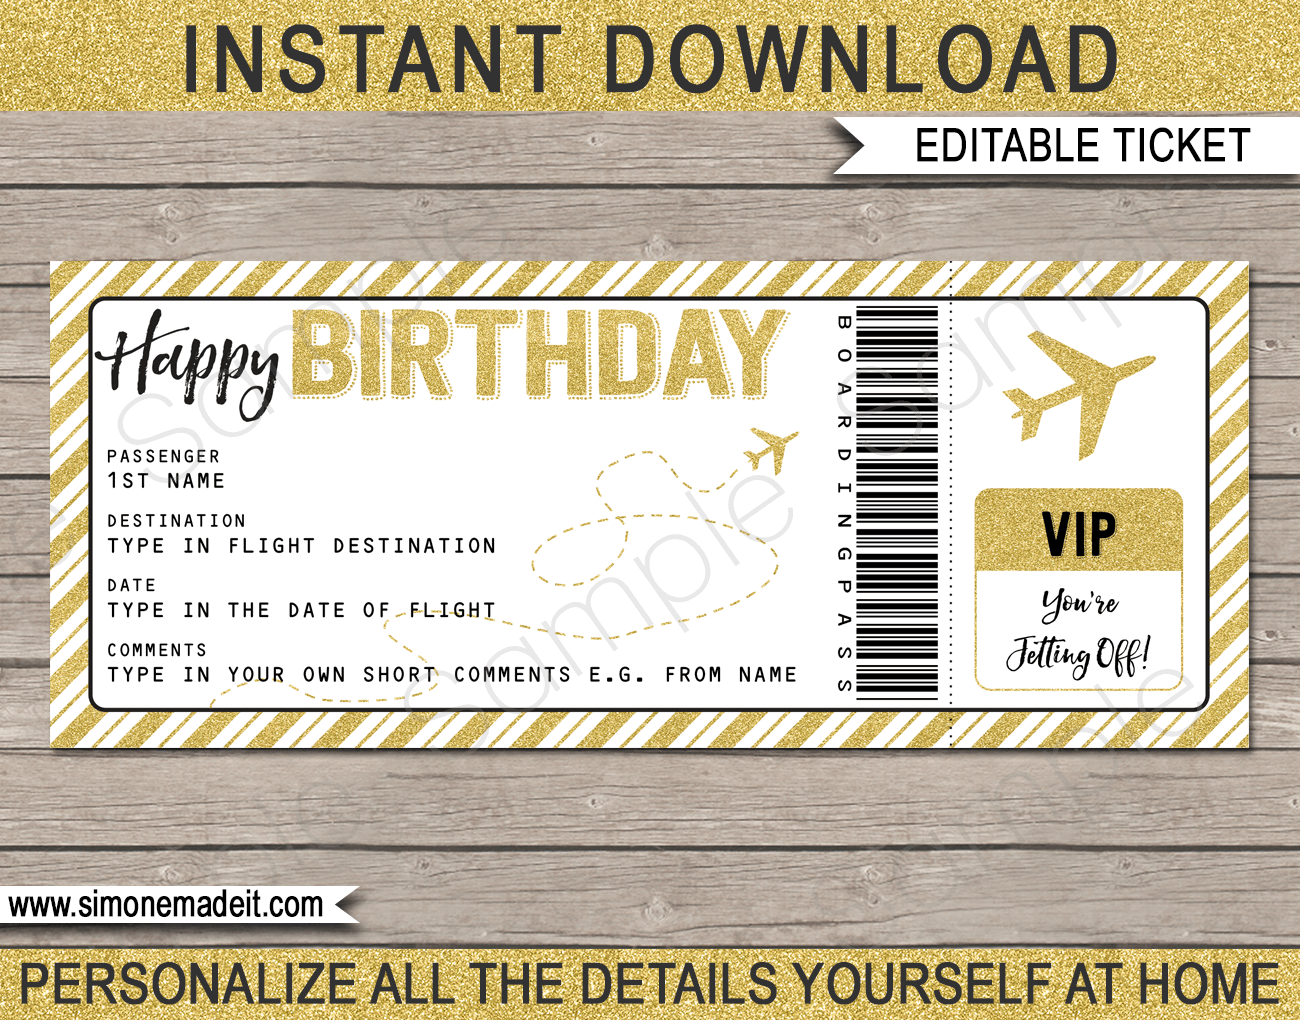 Birthday Boarding Pass Gift Ticket Template Surprise Plane Trip Reveal Surprise Trip Reveal Boarding Pass Template Ticket Template